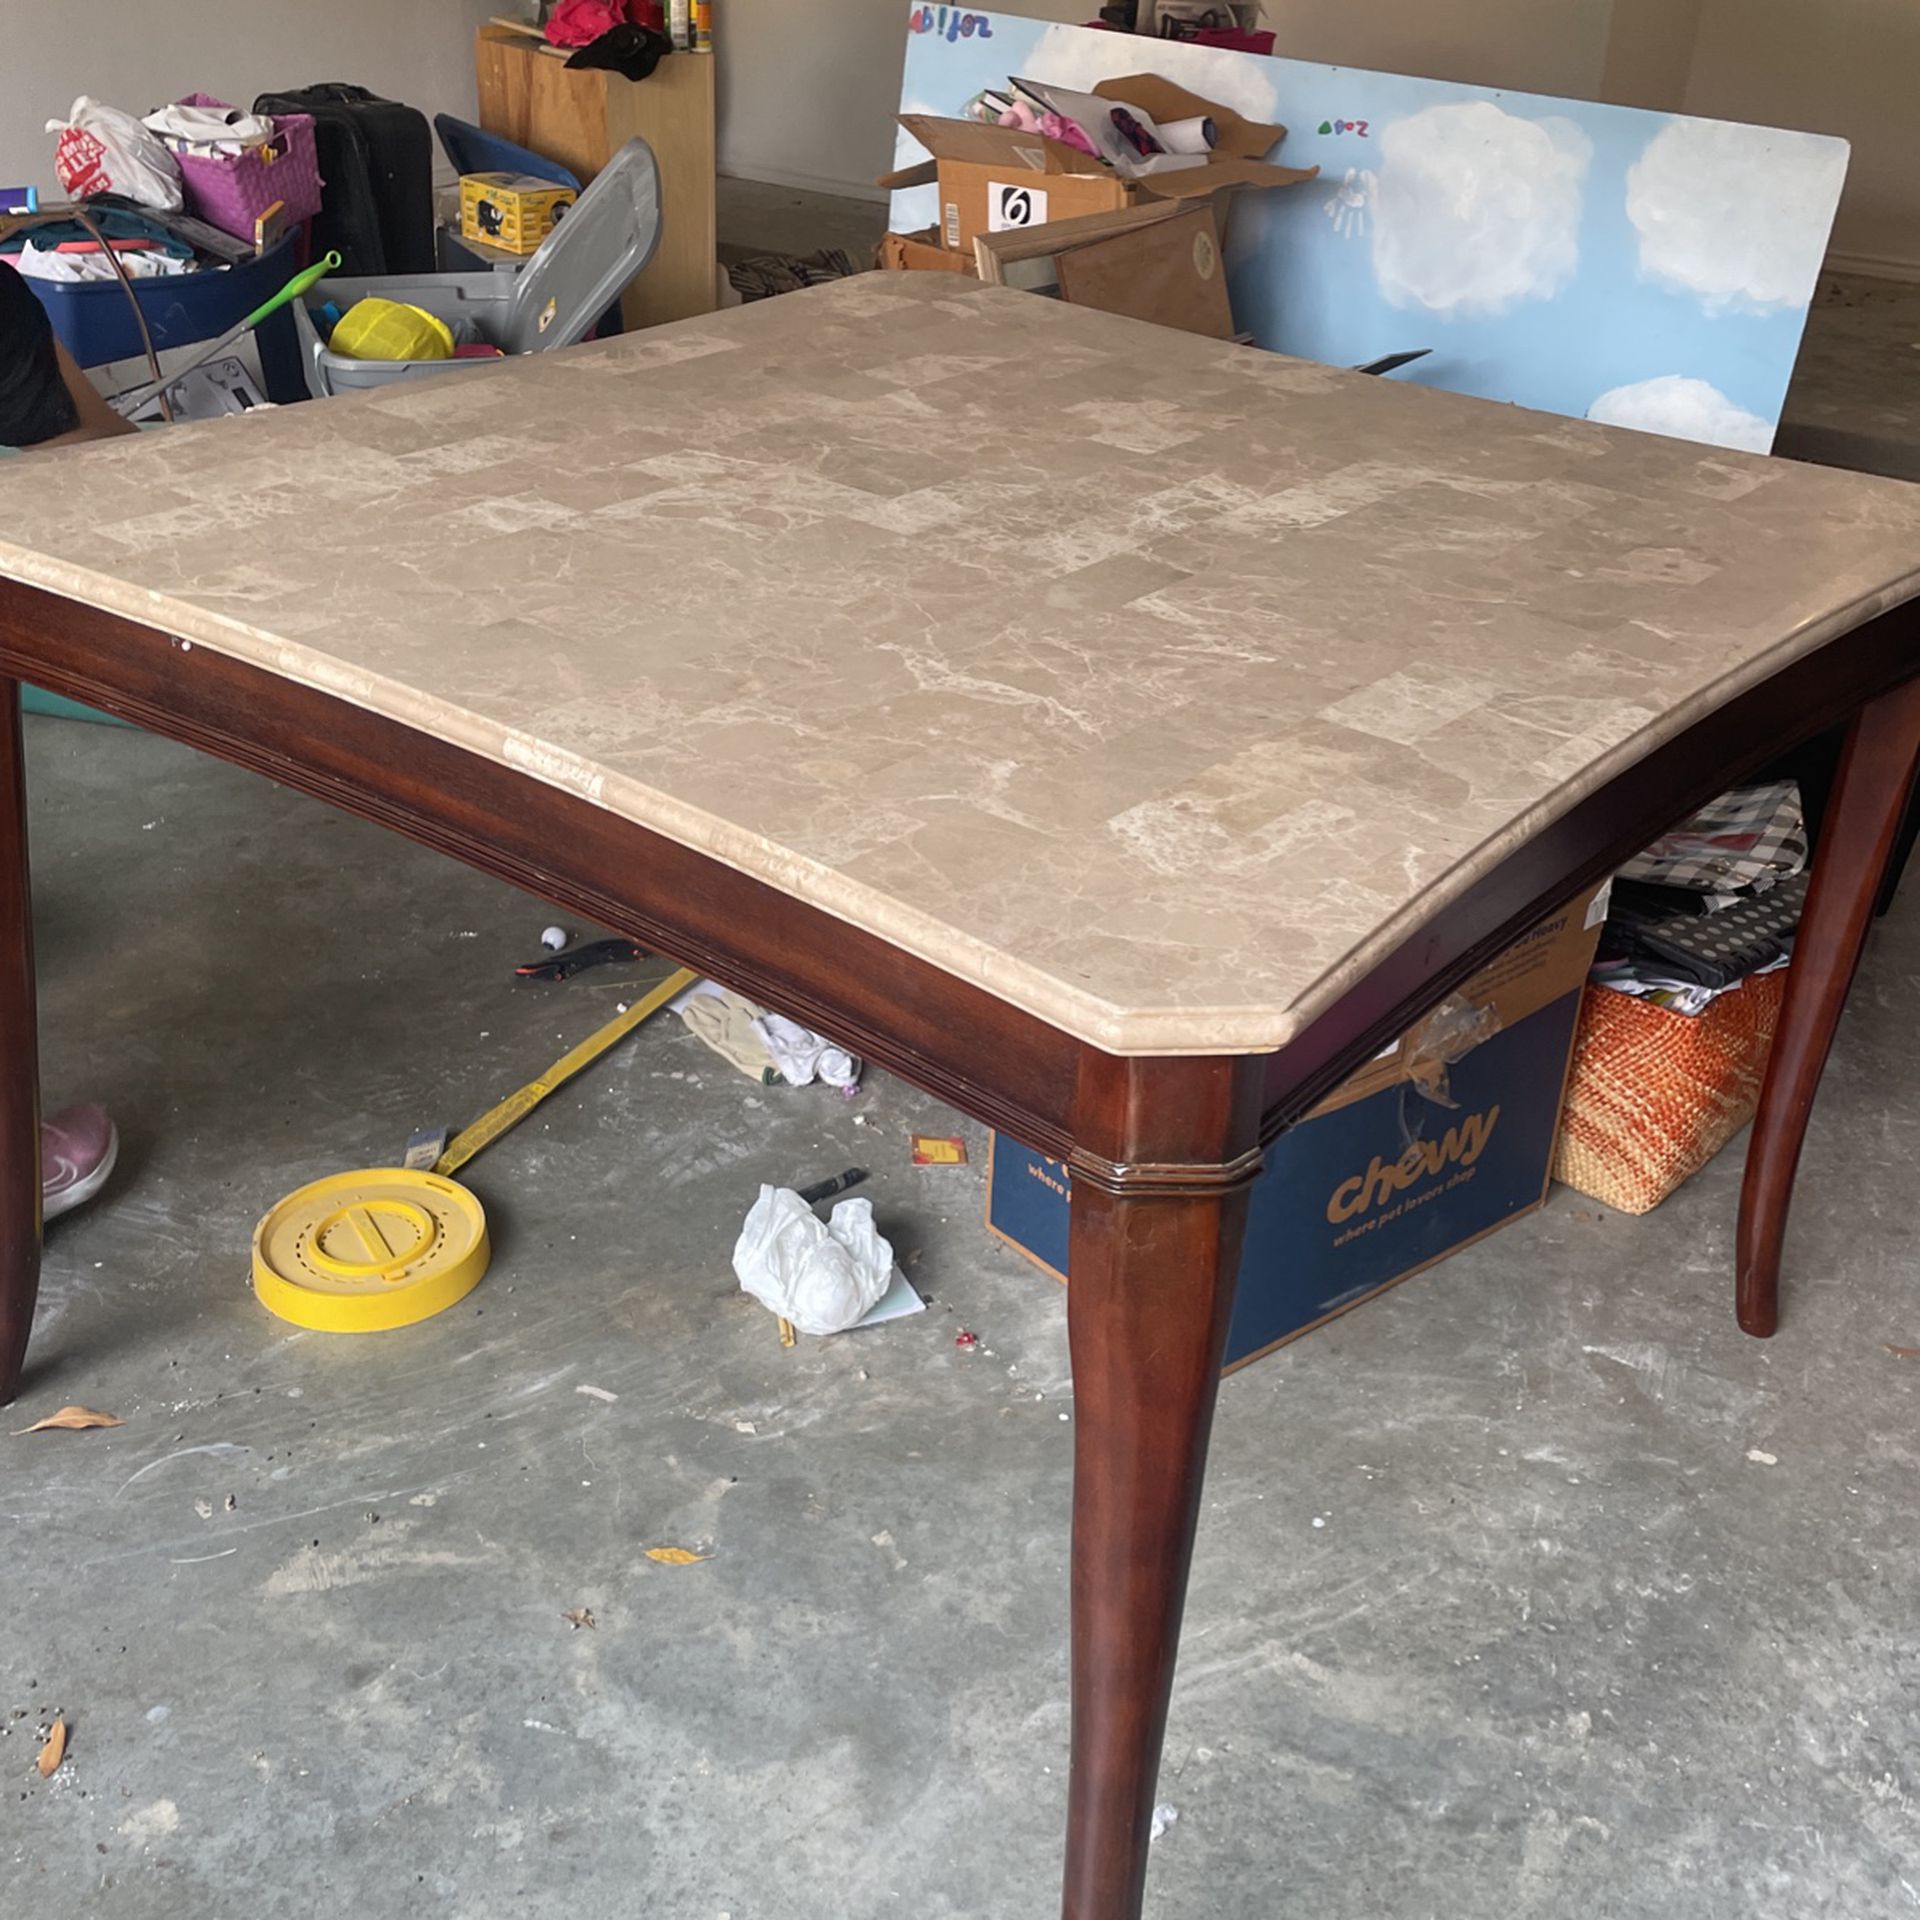 Marble table $100